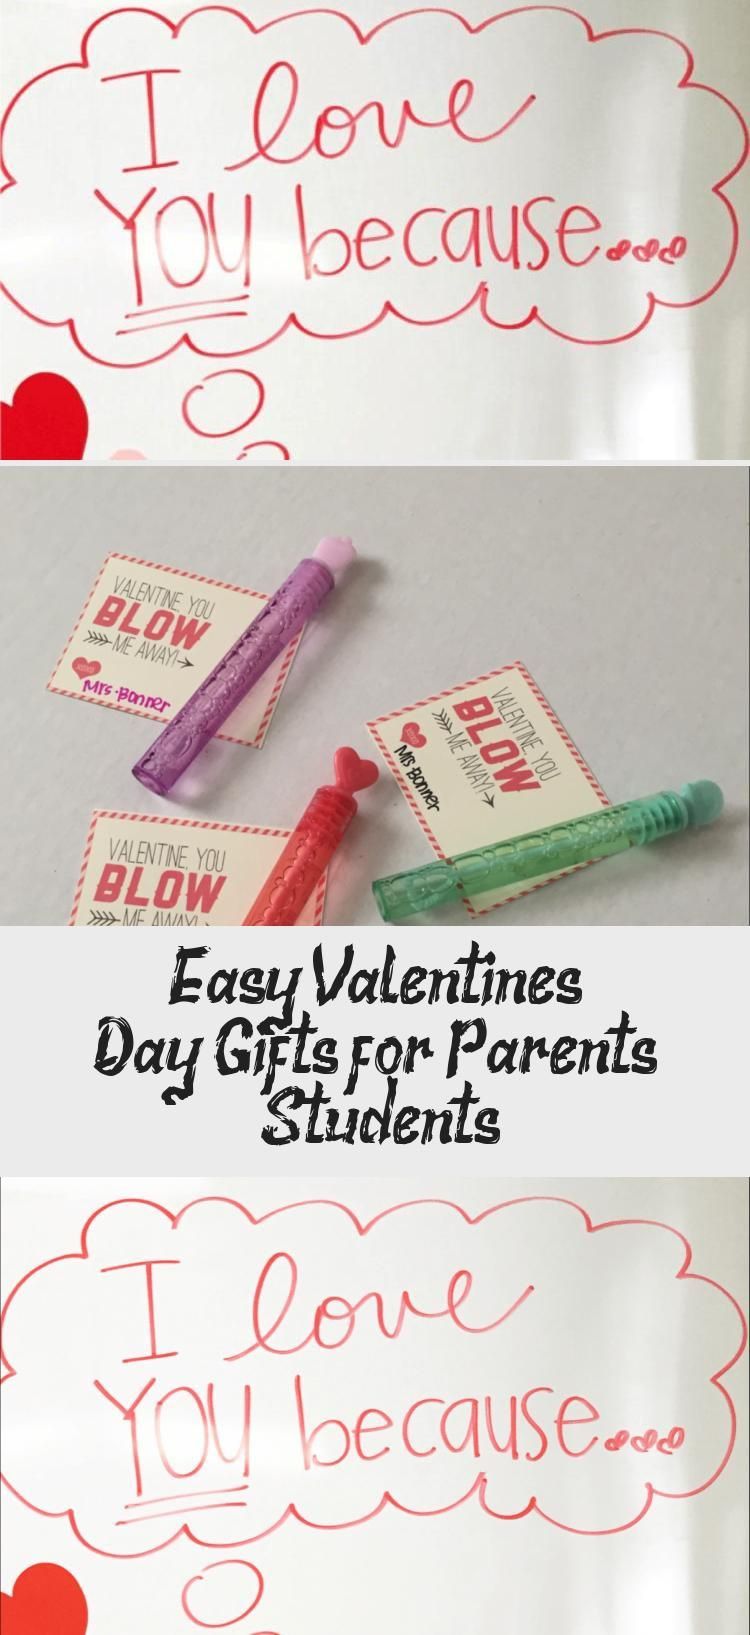 Valentines Day Gifts For Parents
 Easy Valentine’s Day Gifts for Parents & Students